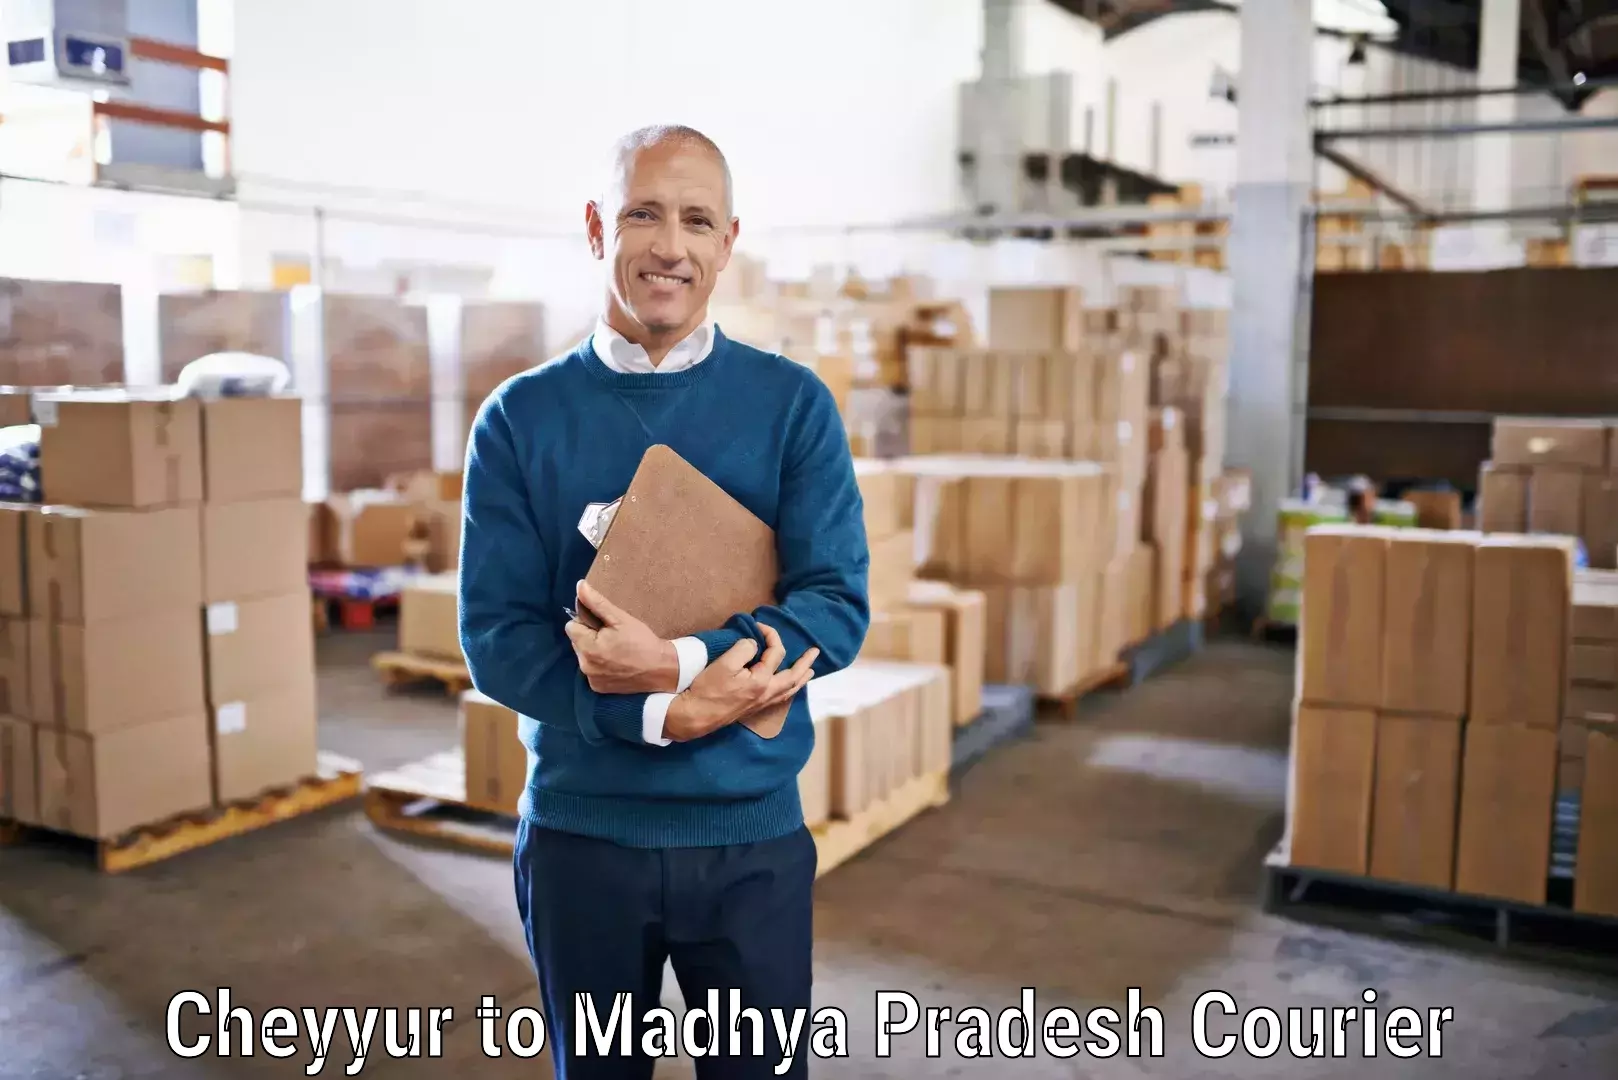 State-of-the-art courier technology Cheyyur to Rampur Naikin